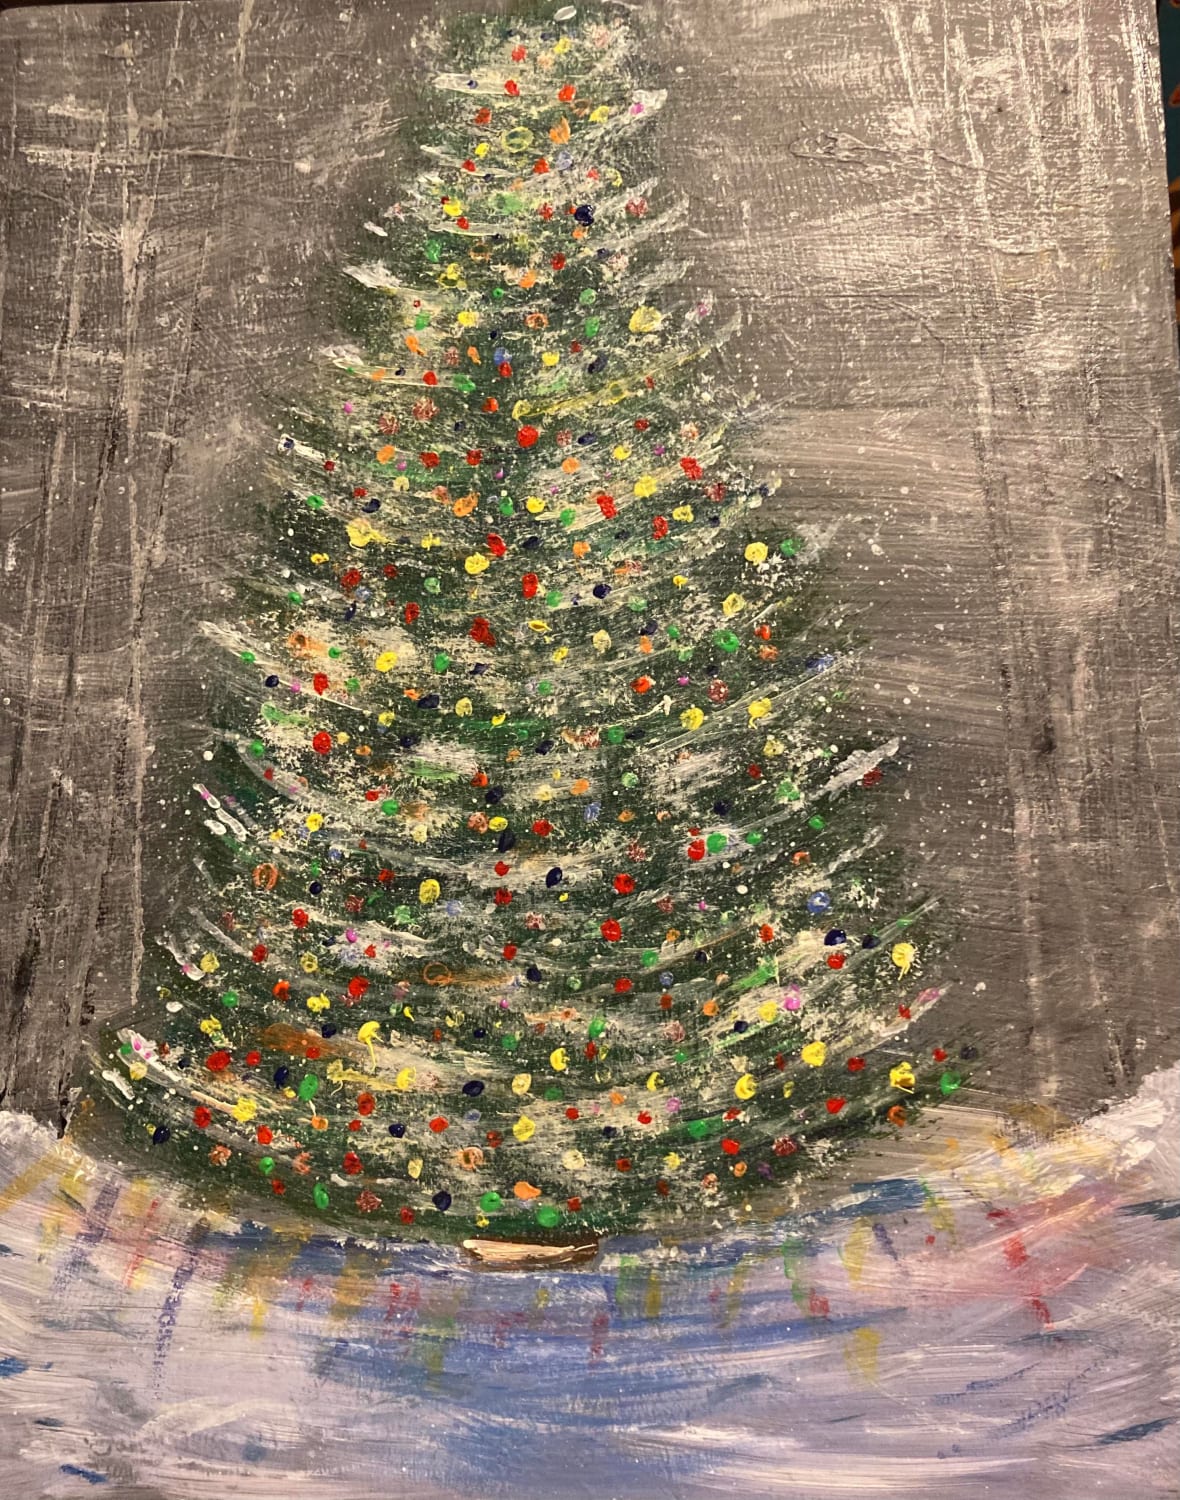 Getting ready to put Christmas away. I painted this, then next year I’ll have forgotten all about it and it will be like a little gift to myself.